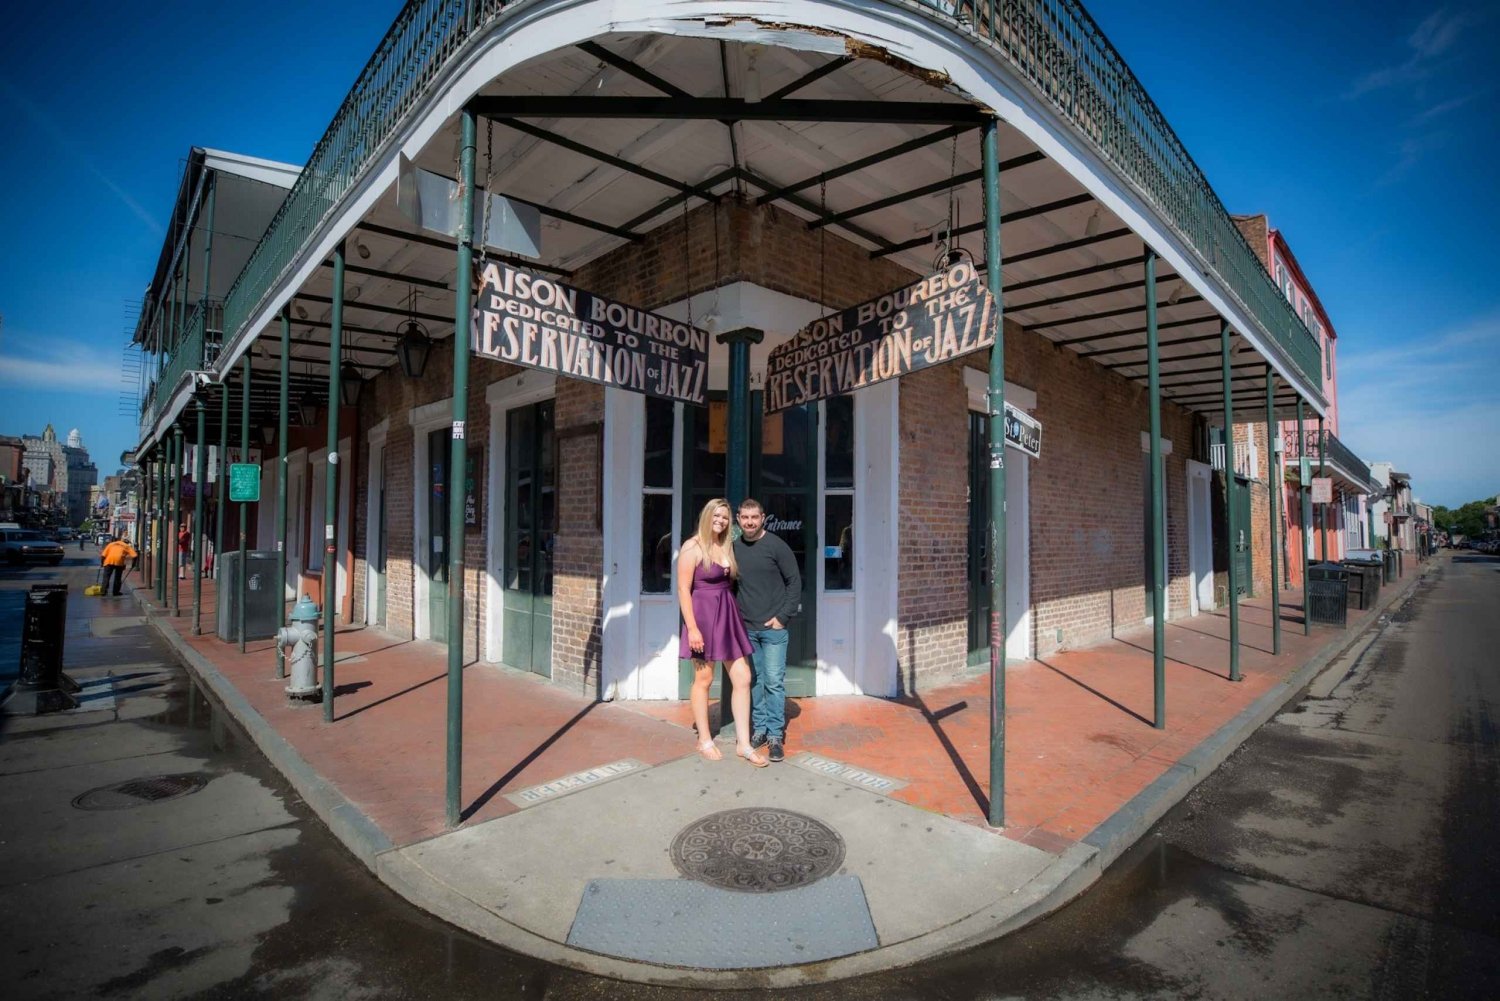 New Orleans: French Quarter Photo Shoot and Walking Tour